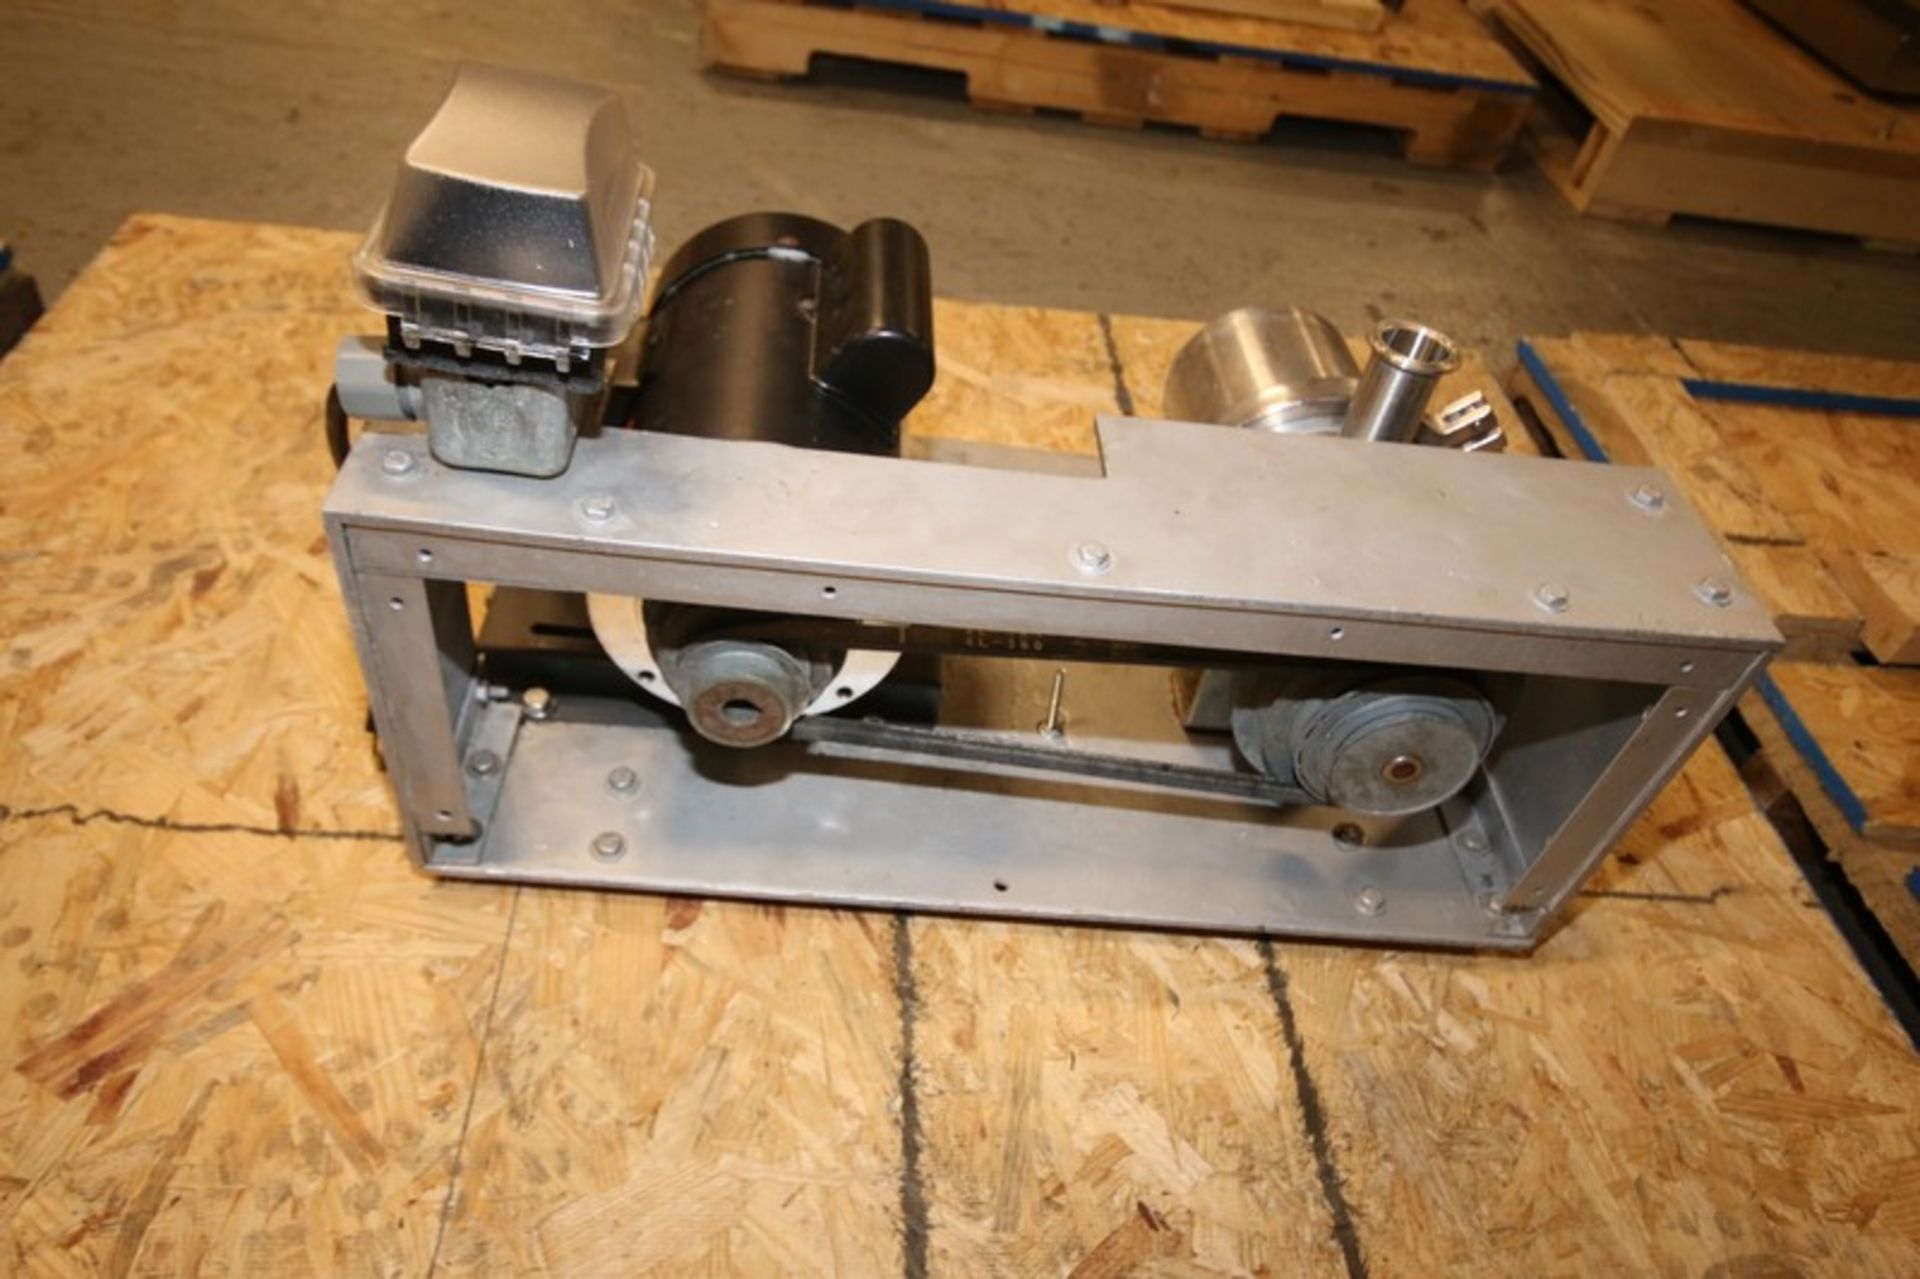 1 hp S/S Pump with 1.5" CT Head, 1725 rpm Motor, 115/230V (INV#101763) (Located @ the MDG Auction - Image 3 of 3